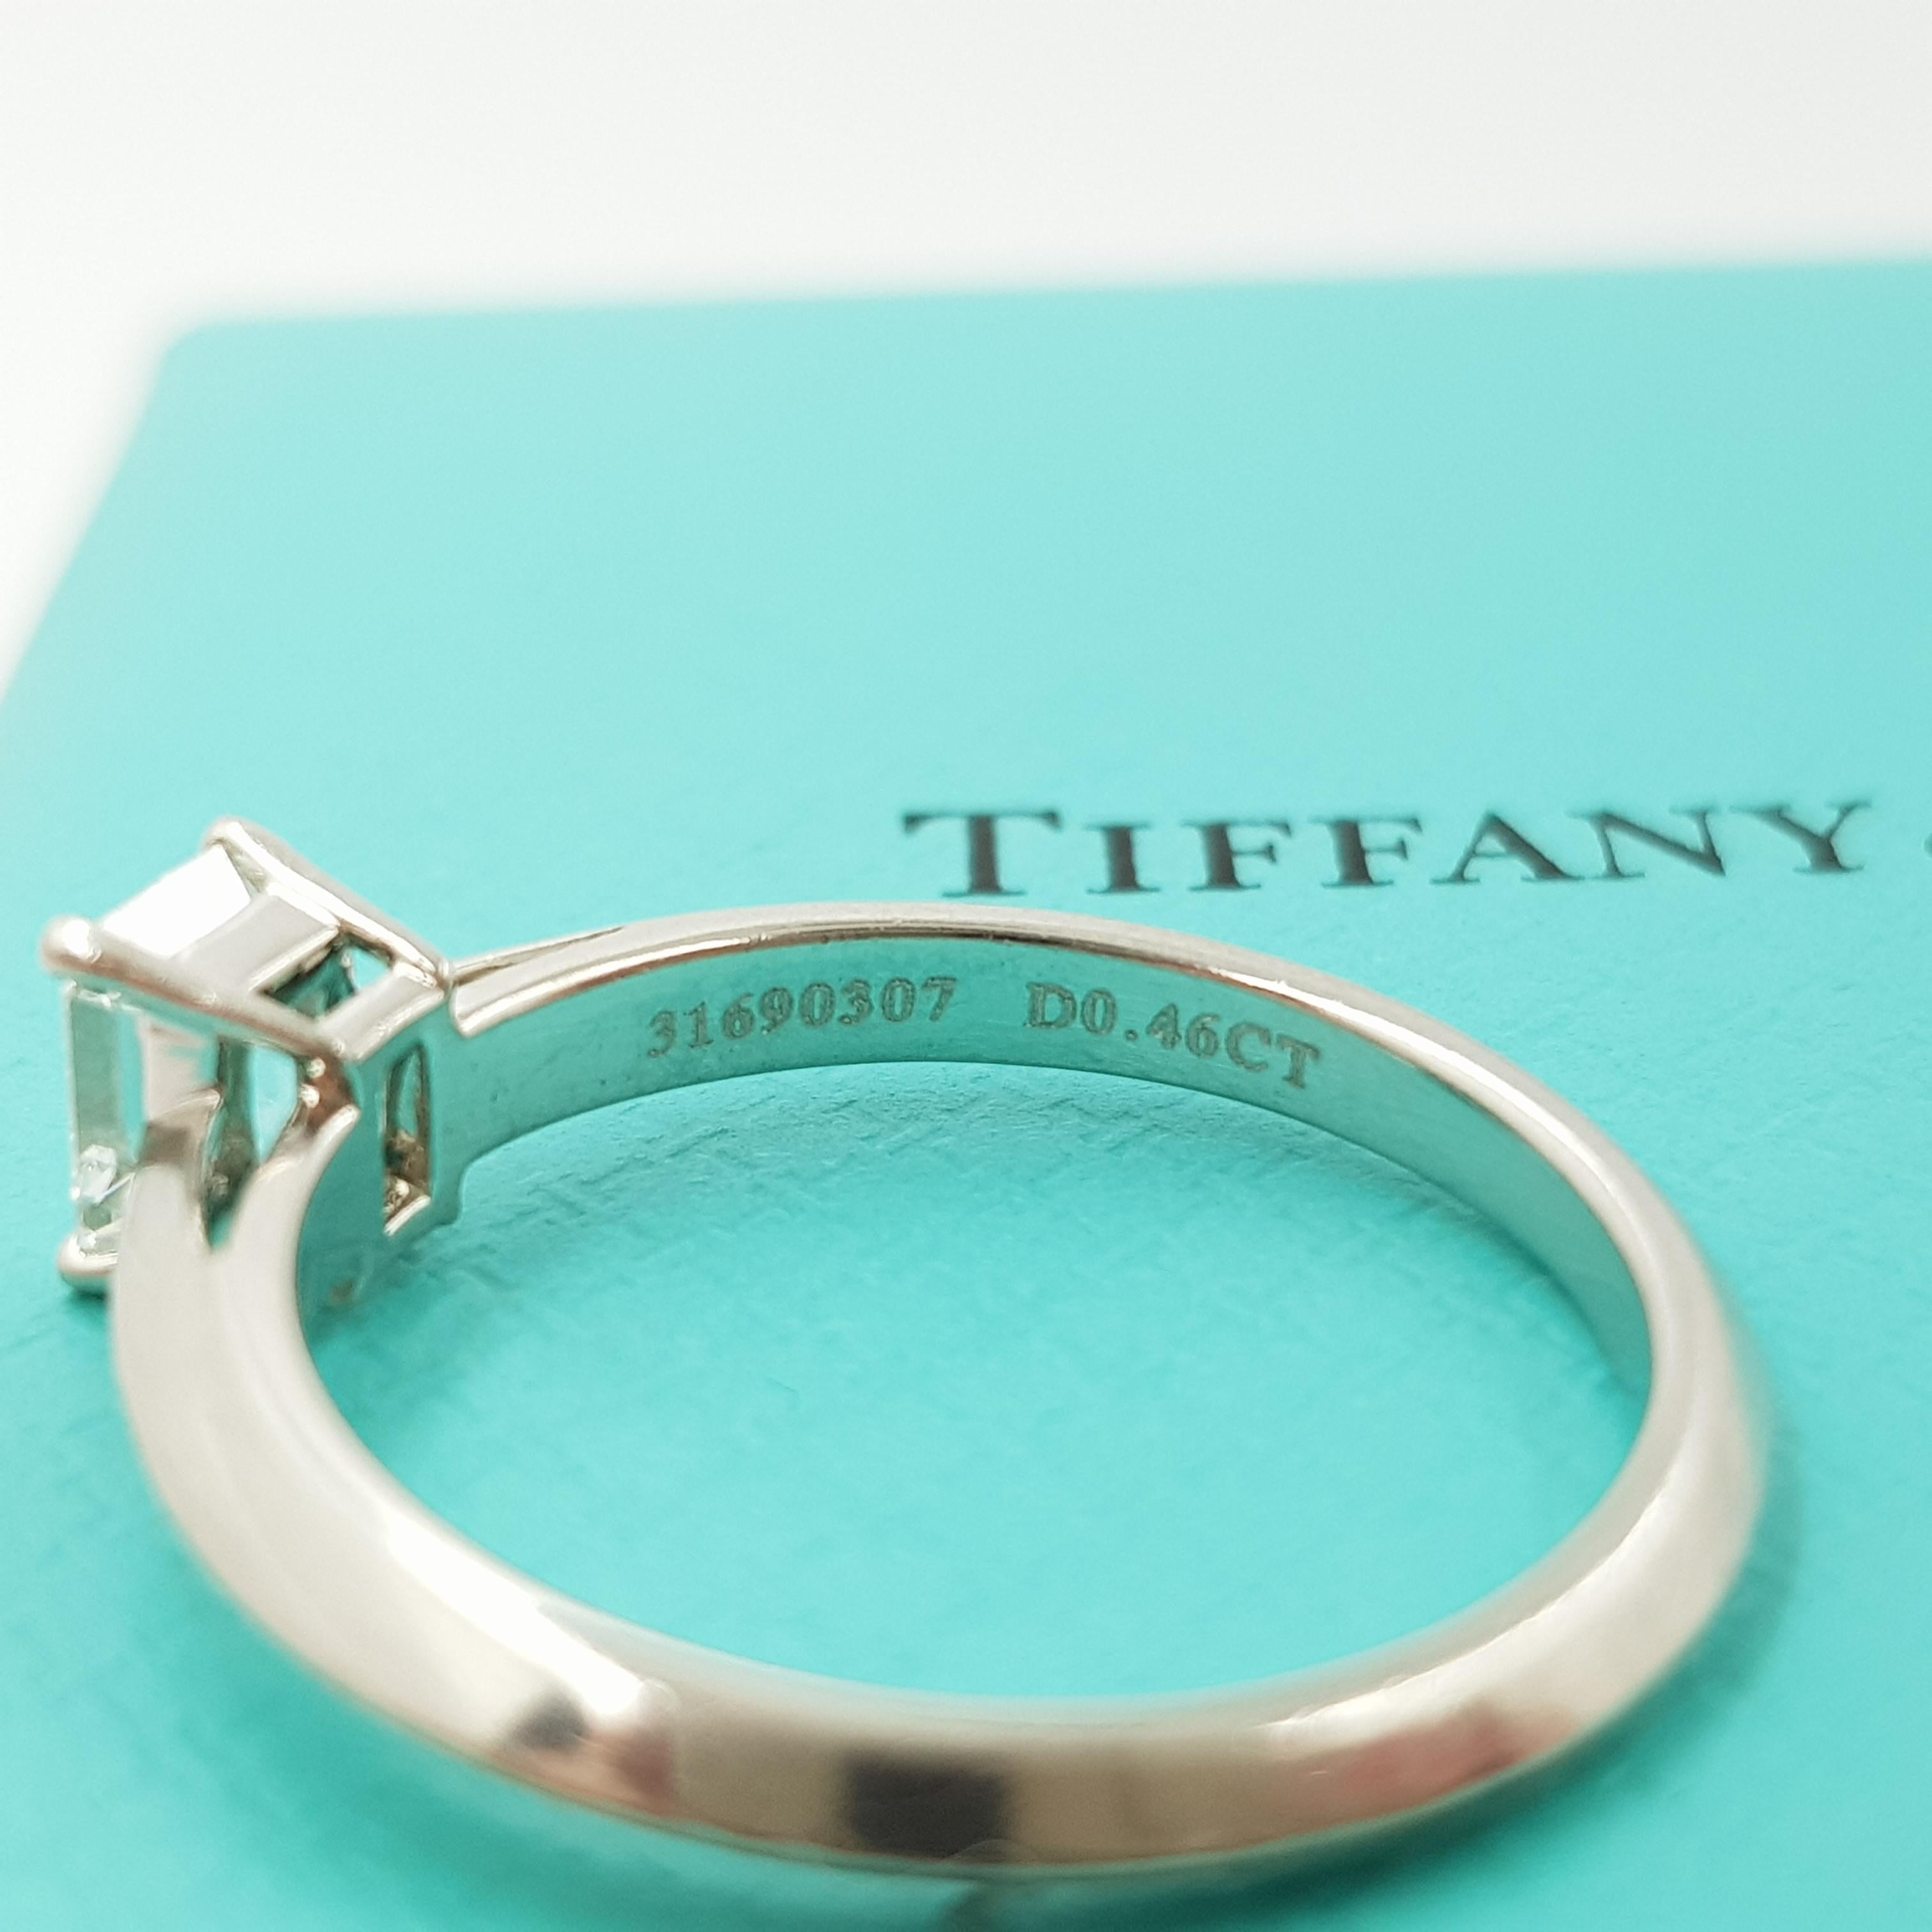 Tiffany & Co. Platinum Solitaire Emerald Cut Diamond Ring with Certification For Sale 4